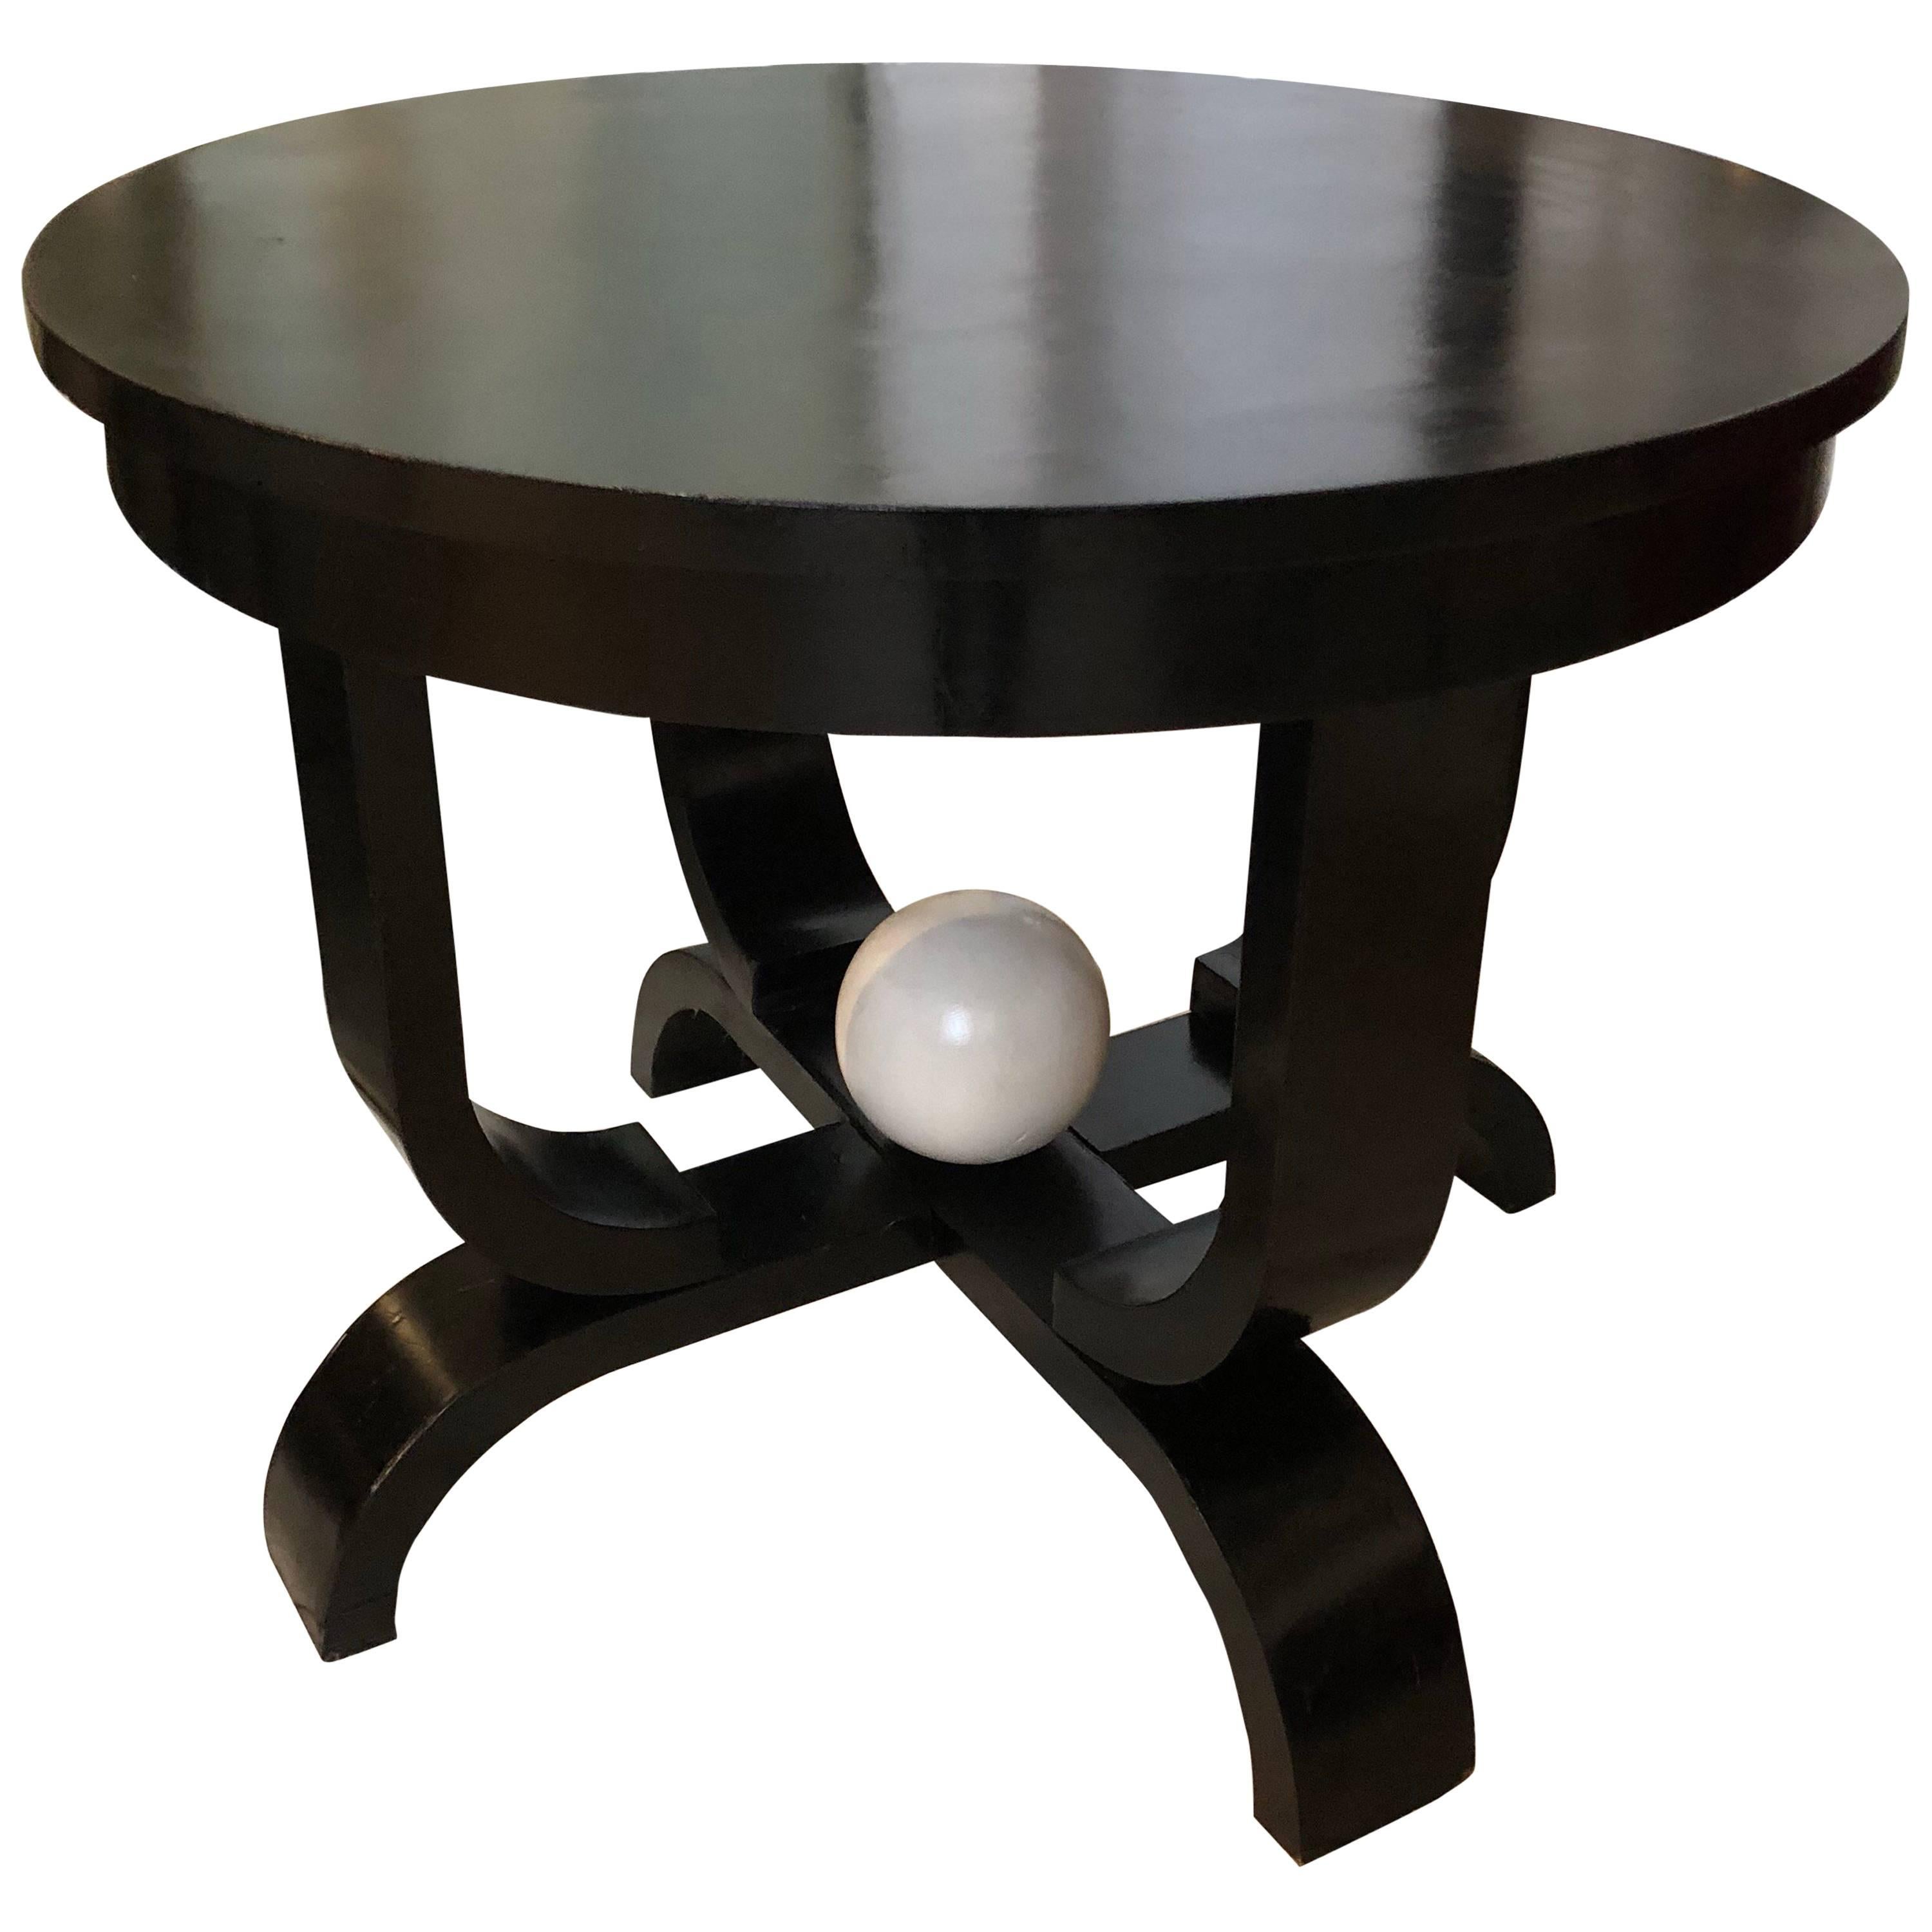 Art Deco French Black and White Painted Wood Side Table circa 1930